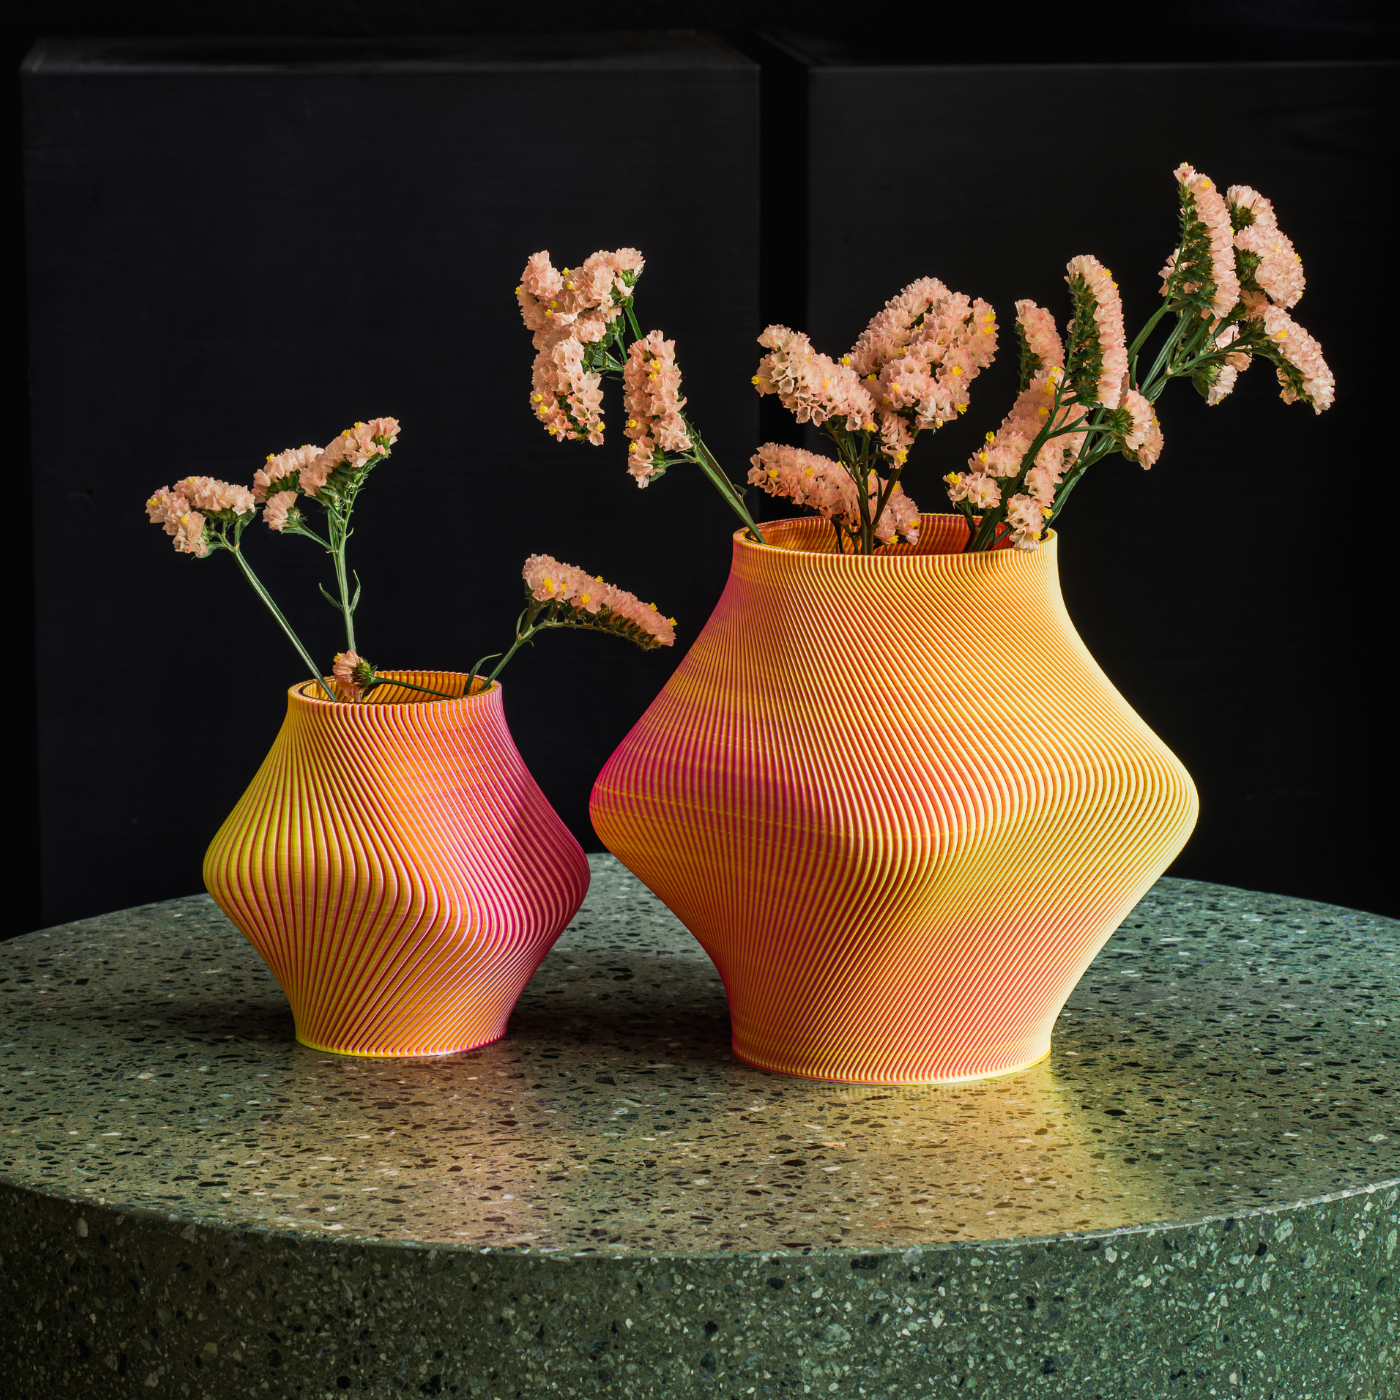 Two orange 3D printed short vases filled with flowers, placed on a stone round table.